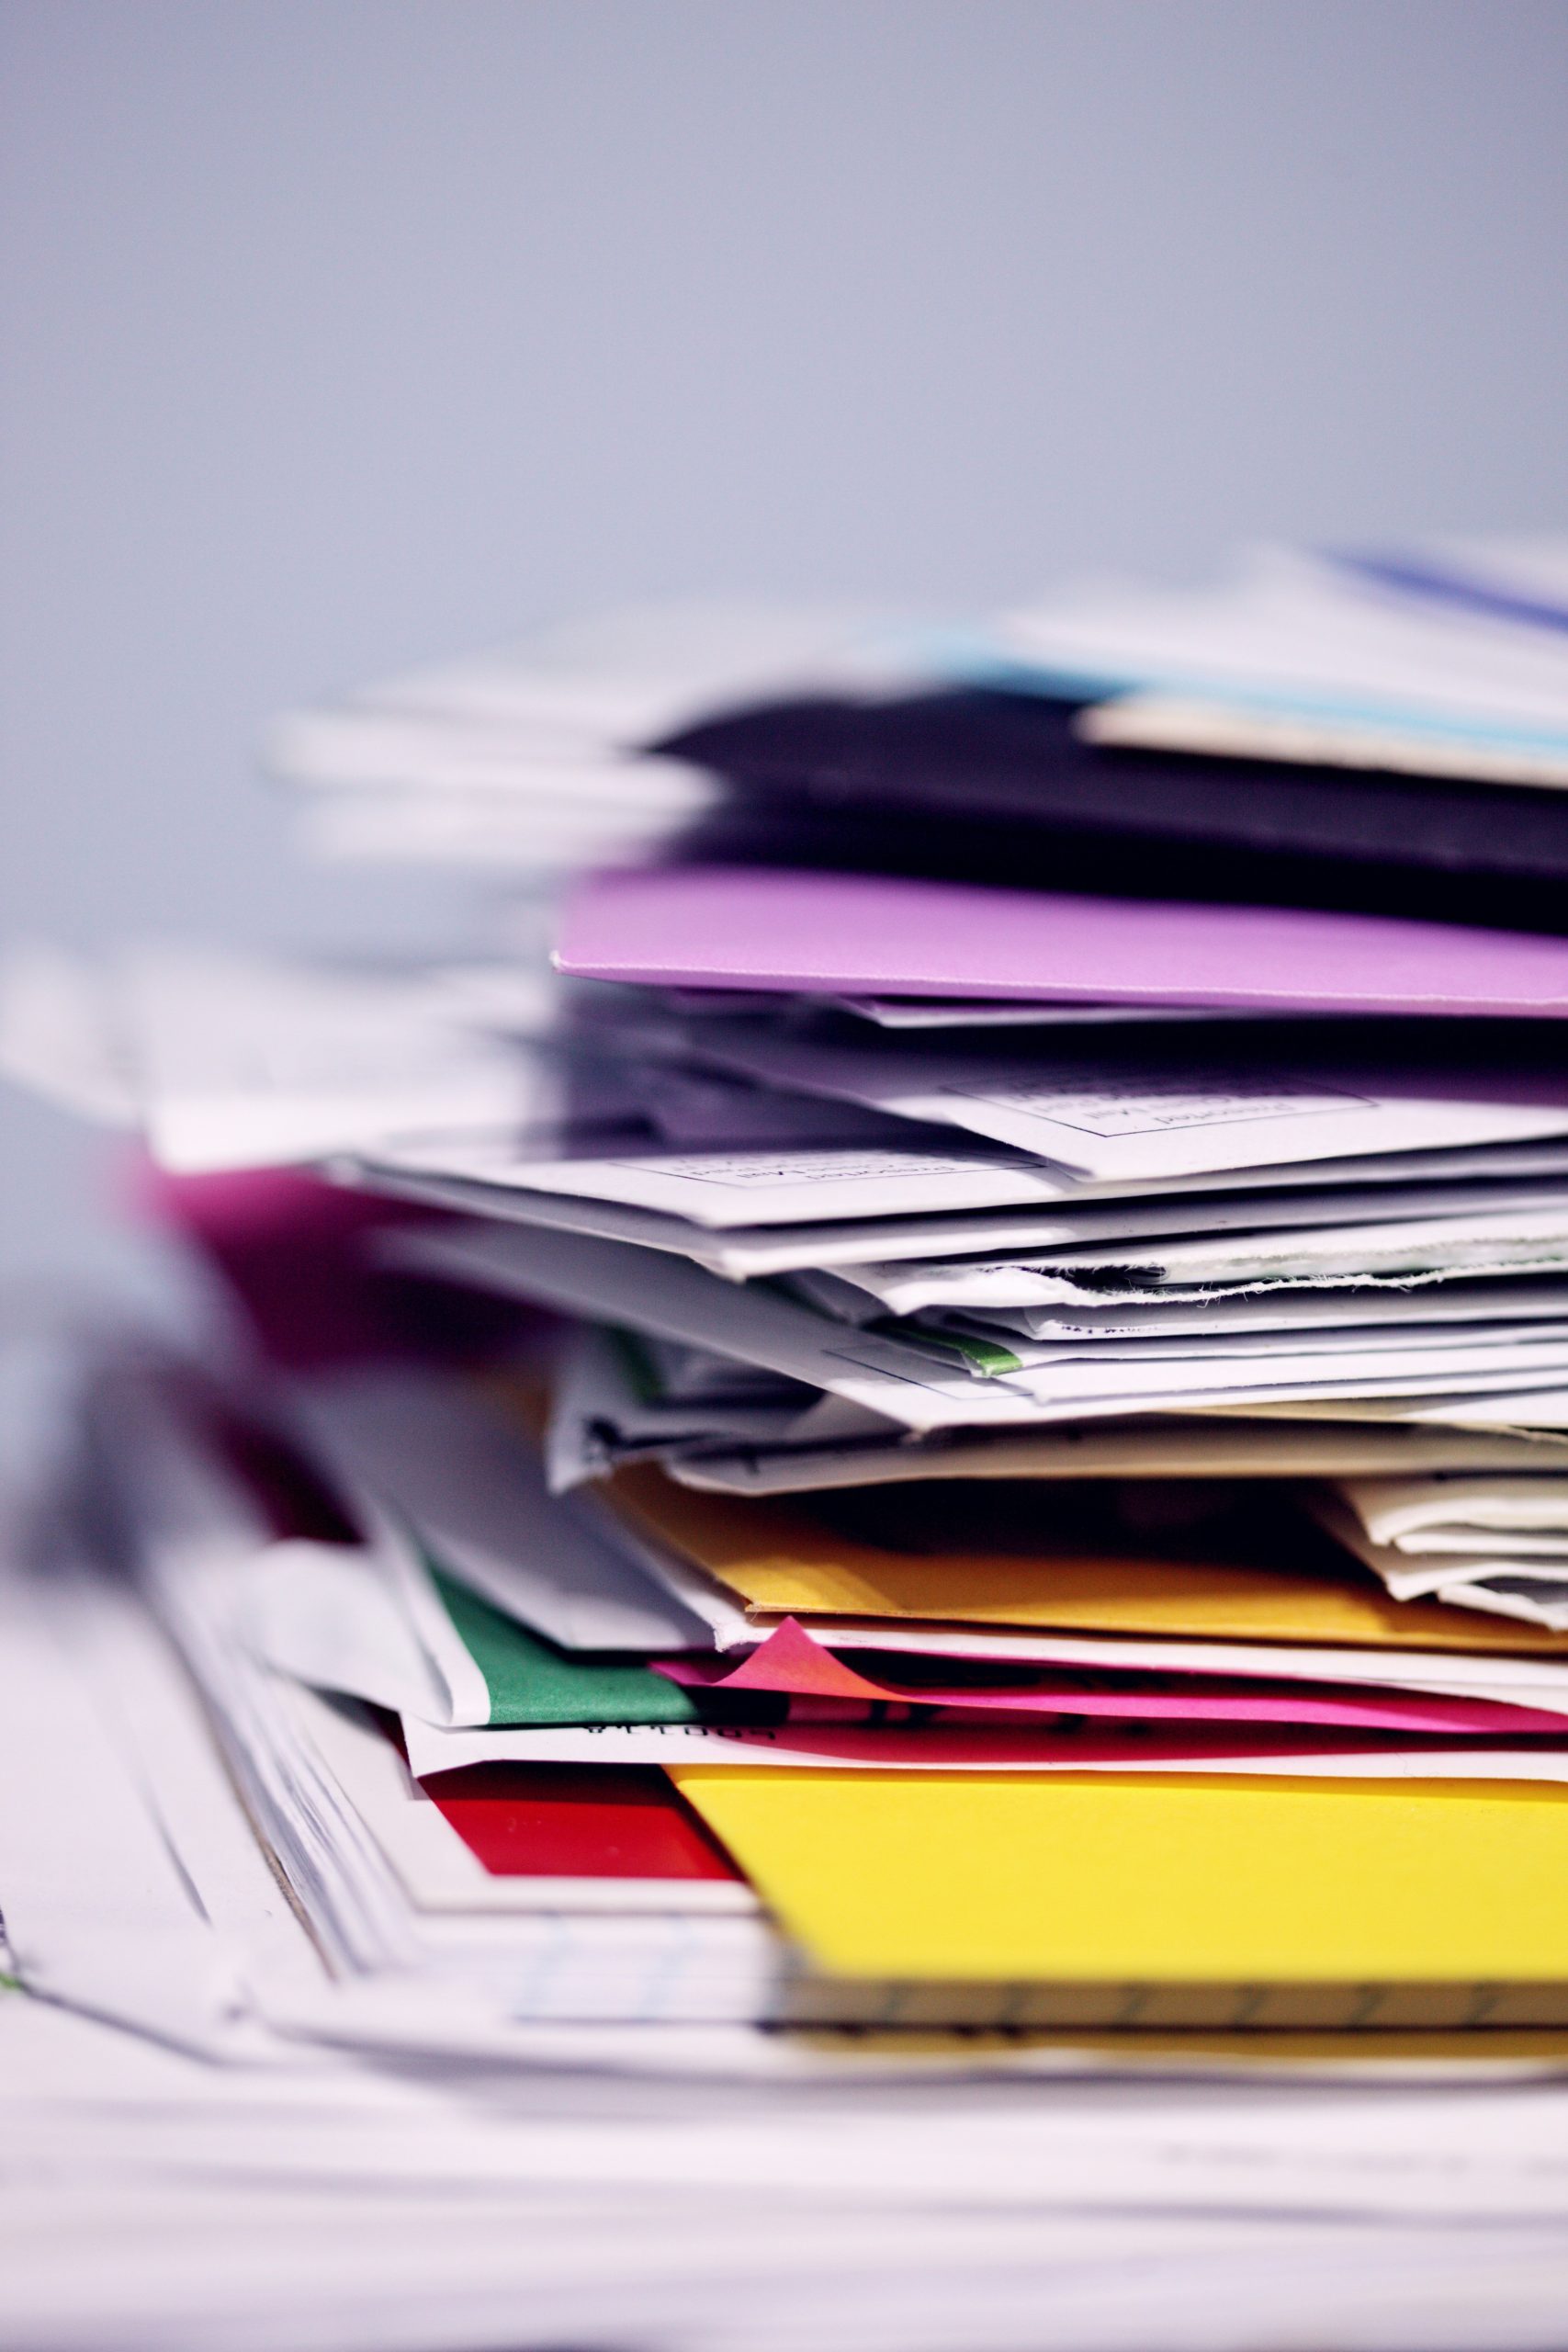 Pile of paper and files on a table